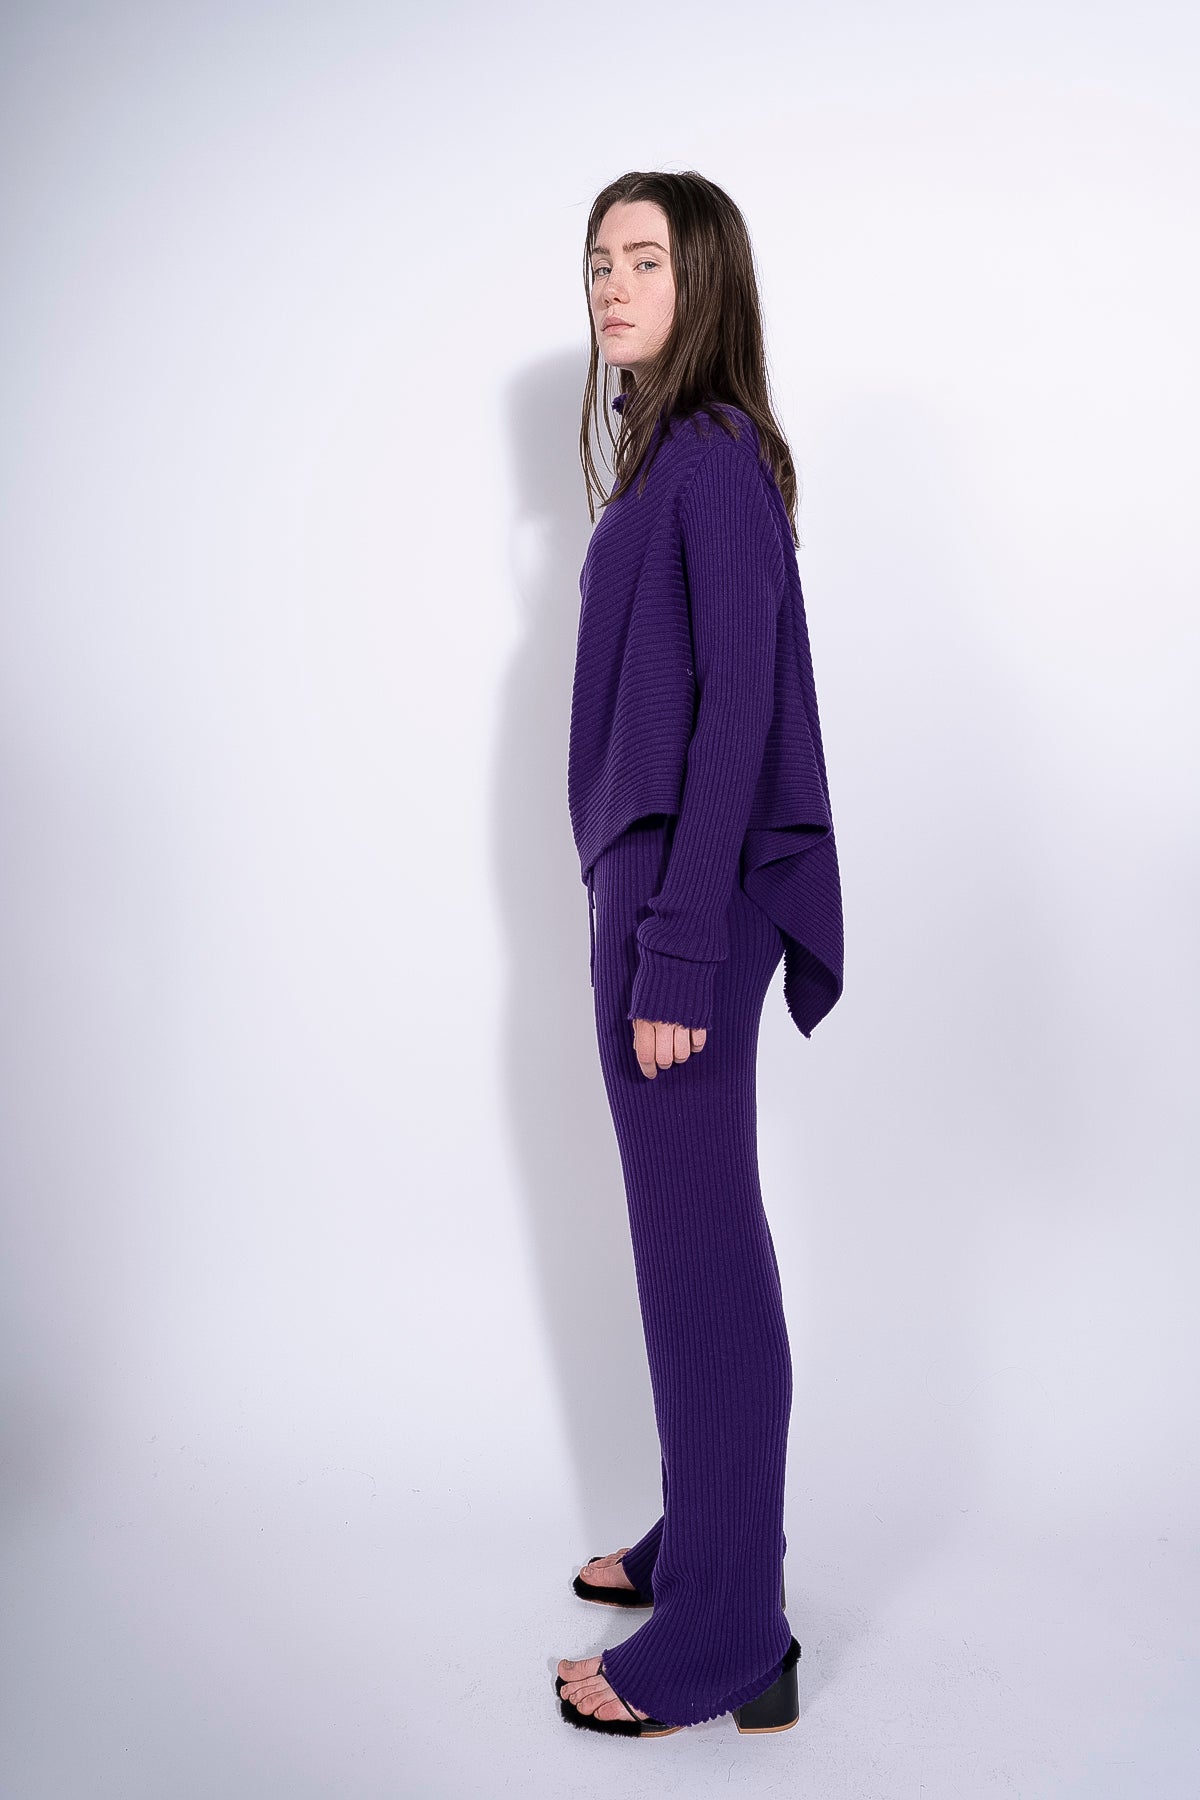 PURPLE KNITTED TROUSERS marques almeida